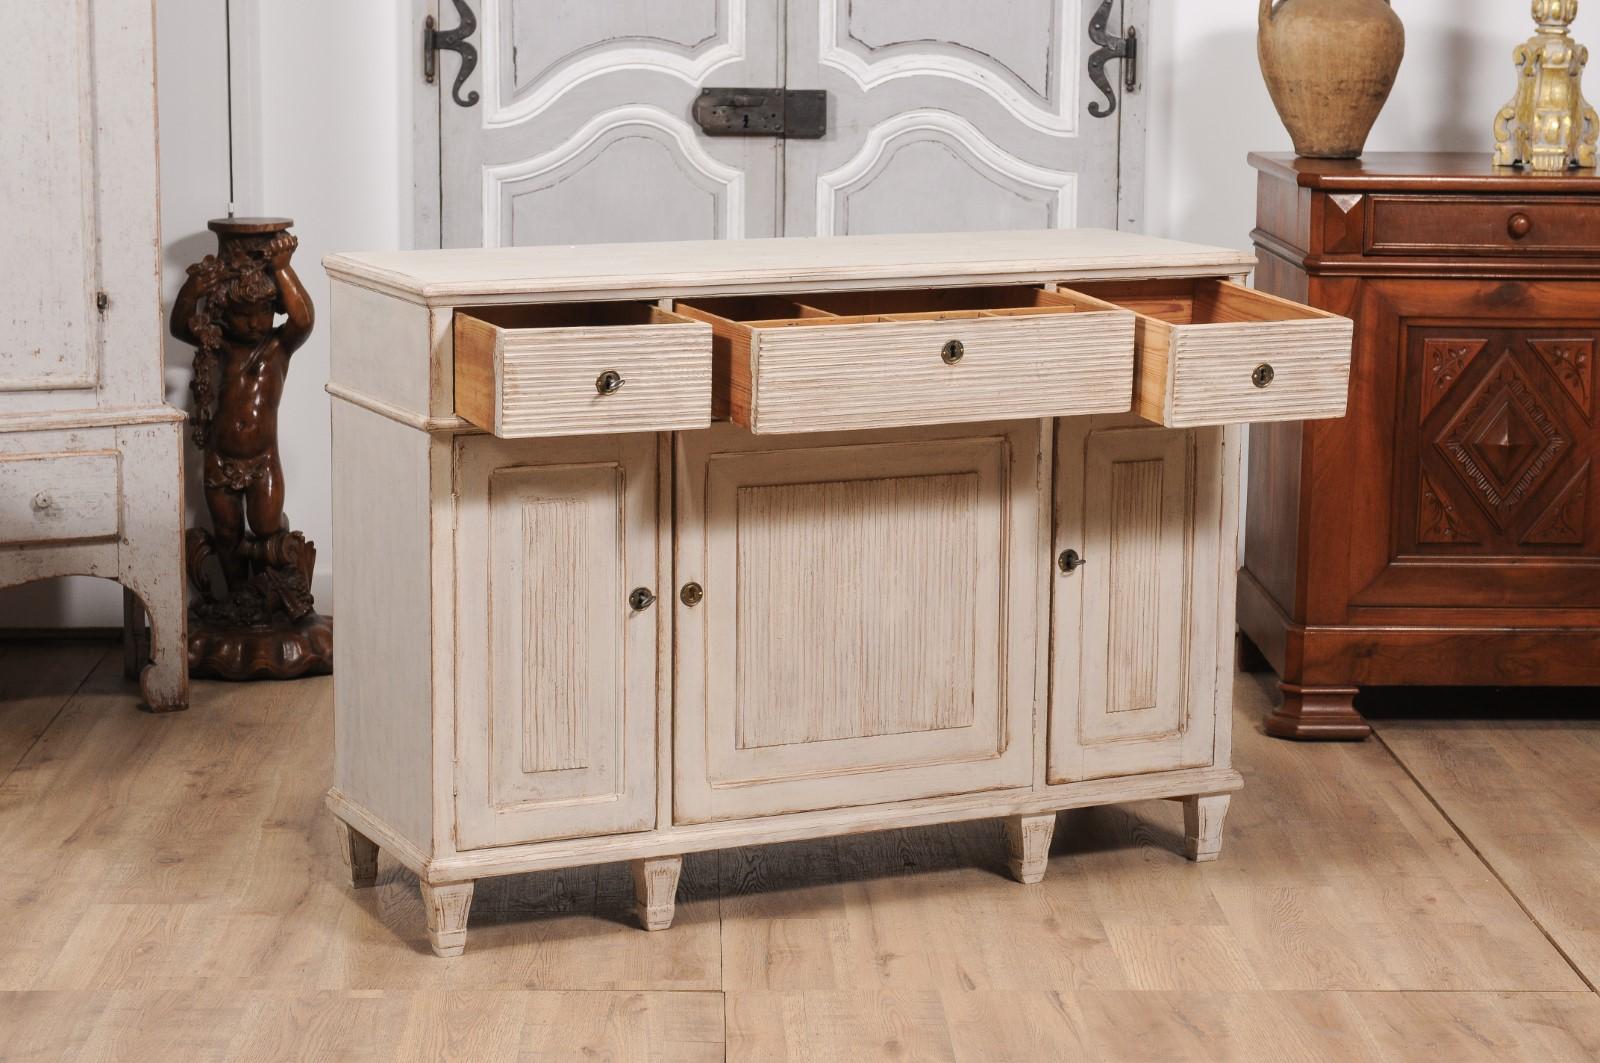 Carved Swedish 1860s Creamy Gray Painted Sideboard with Reeded Doors and Drawers For Sale